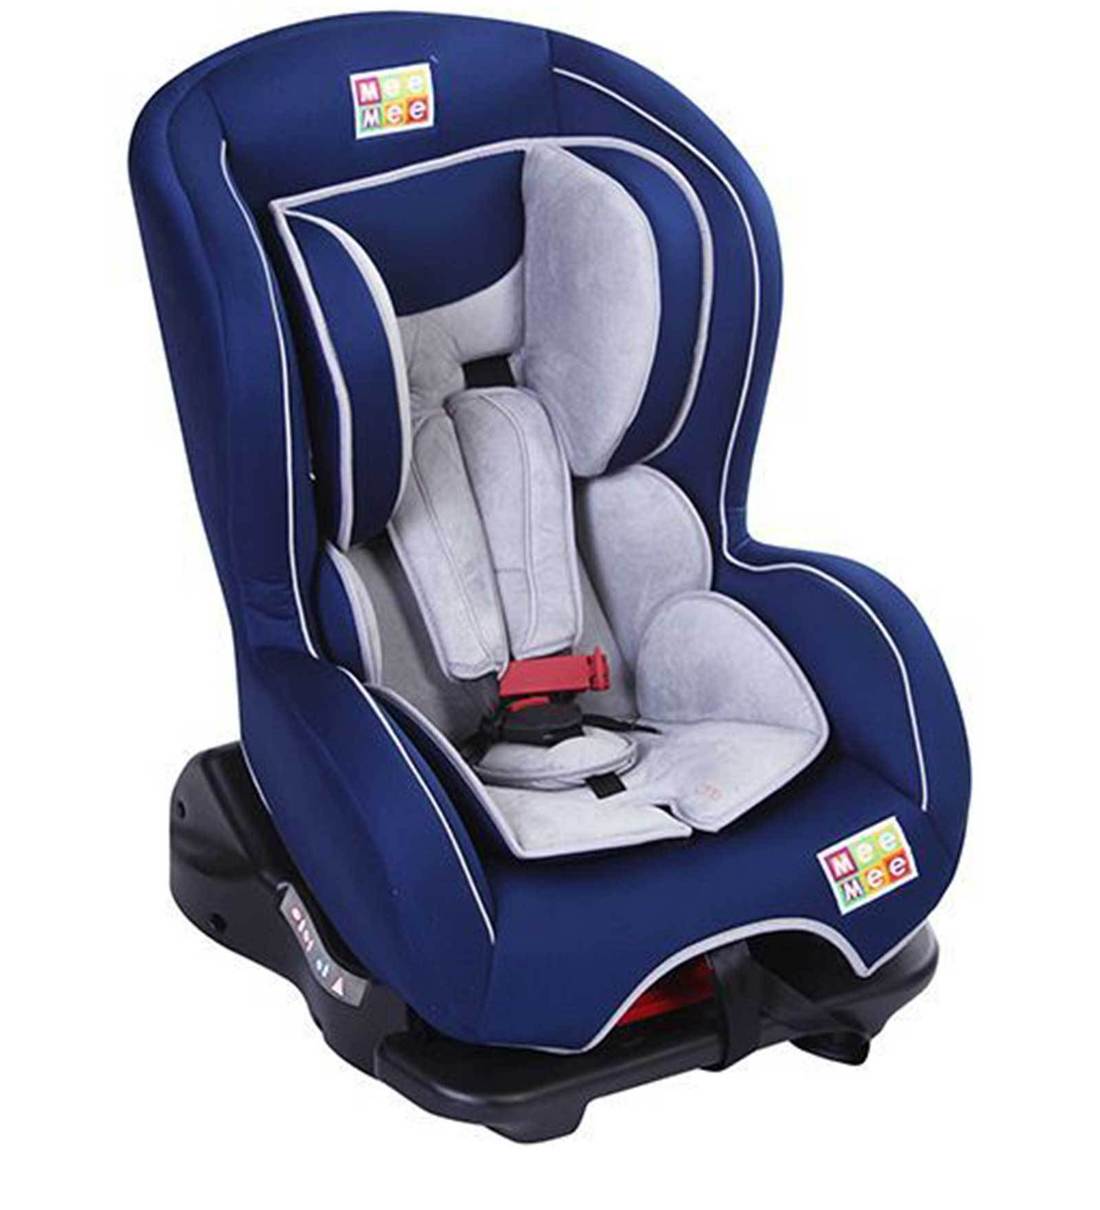 Mee Mee Grow With Me Car Seat reviews in 2023